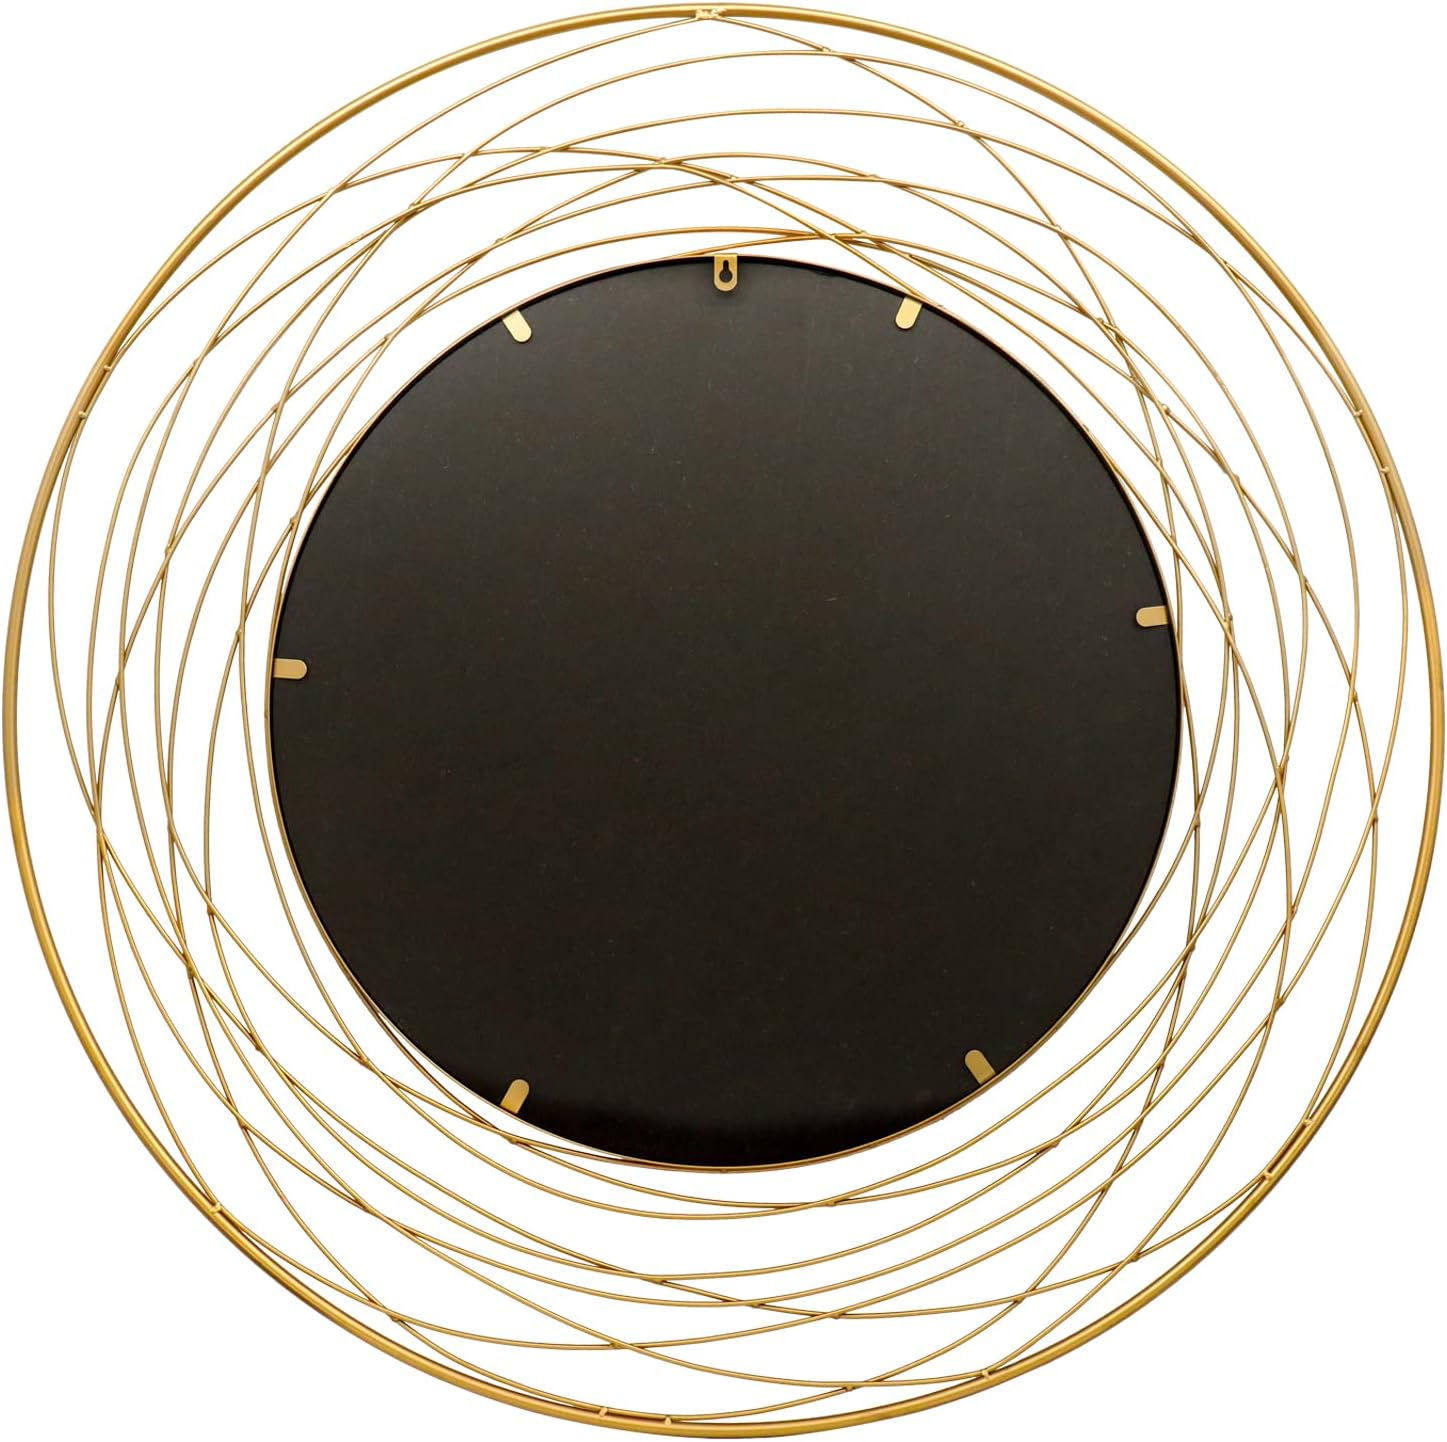 AULESET 39" Gold Art Large Round Mirror with Metal Wire Frame - $60